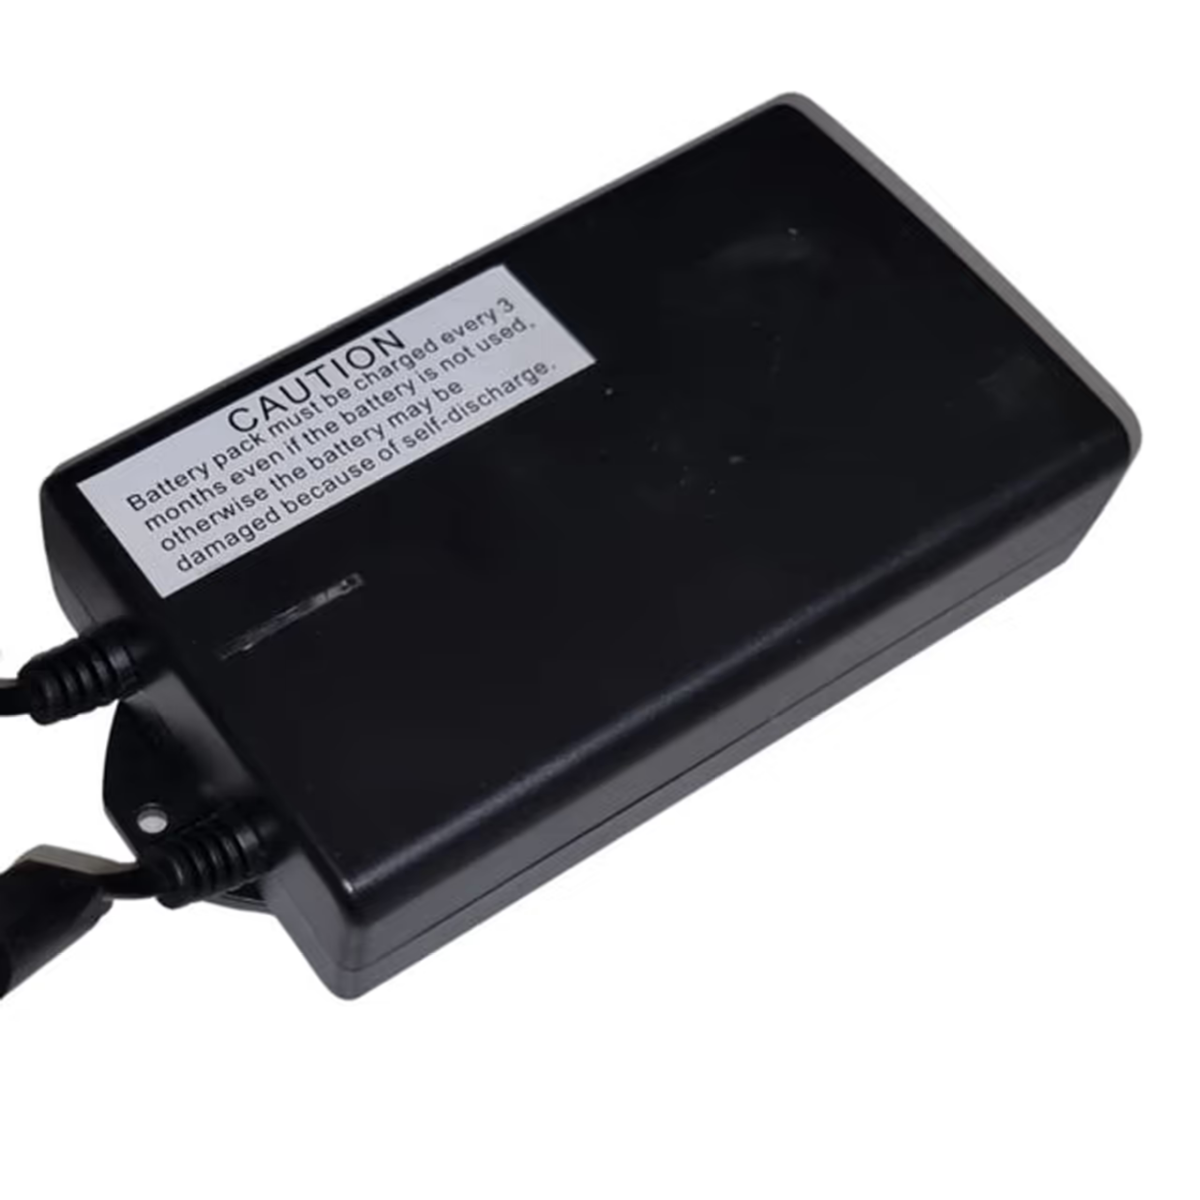 Backup battery pack for motorised recliner chairs | Accessory